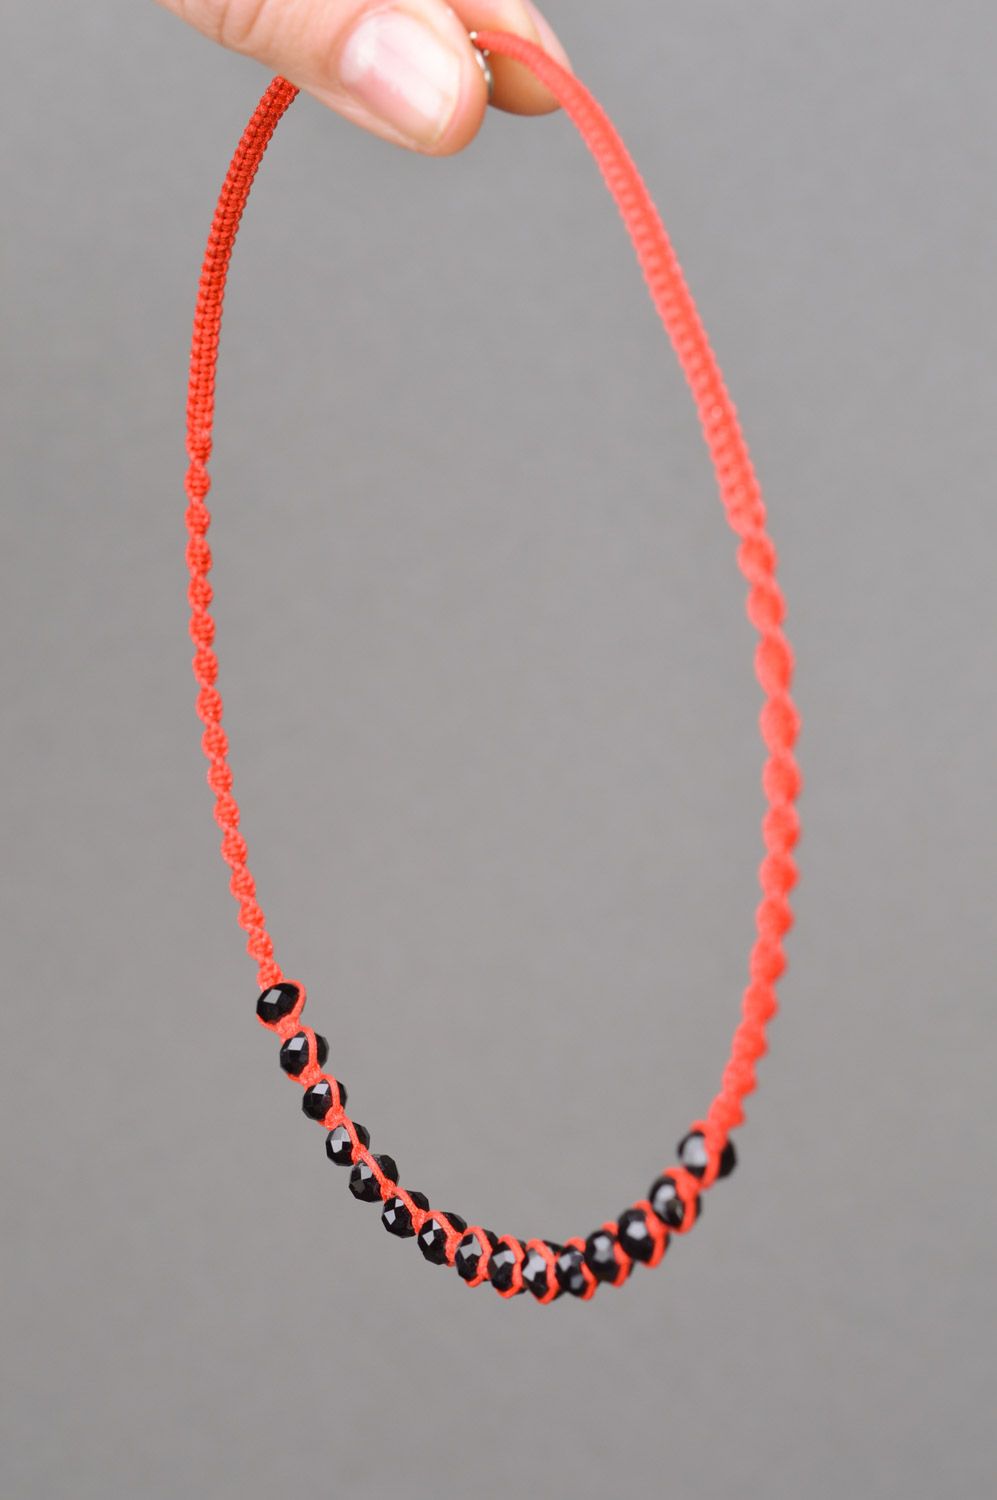 Handmade necklace woven of red threads and black beads on wire frame for women photo 3